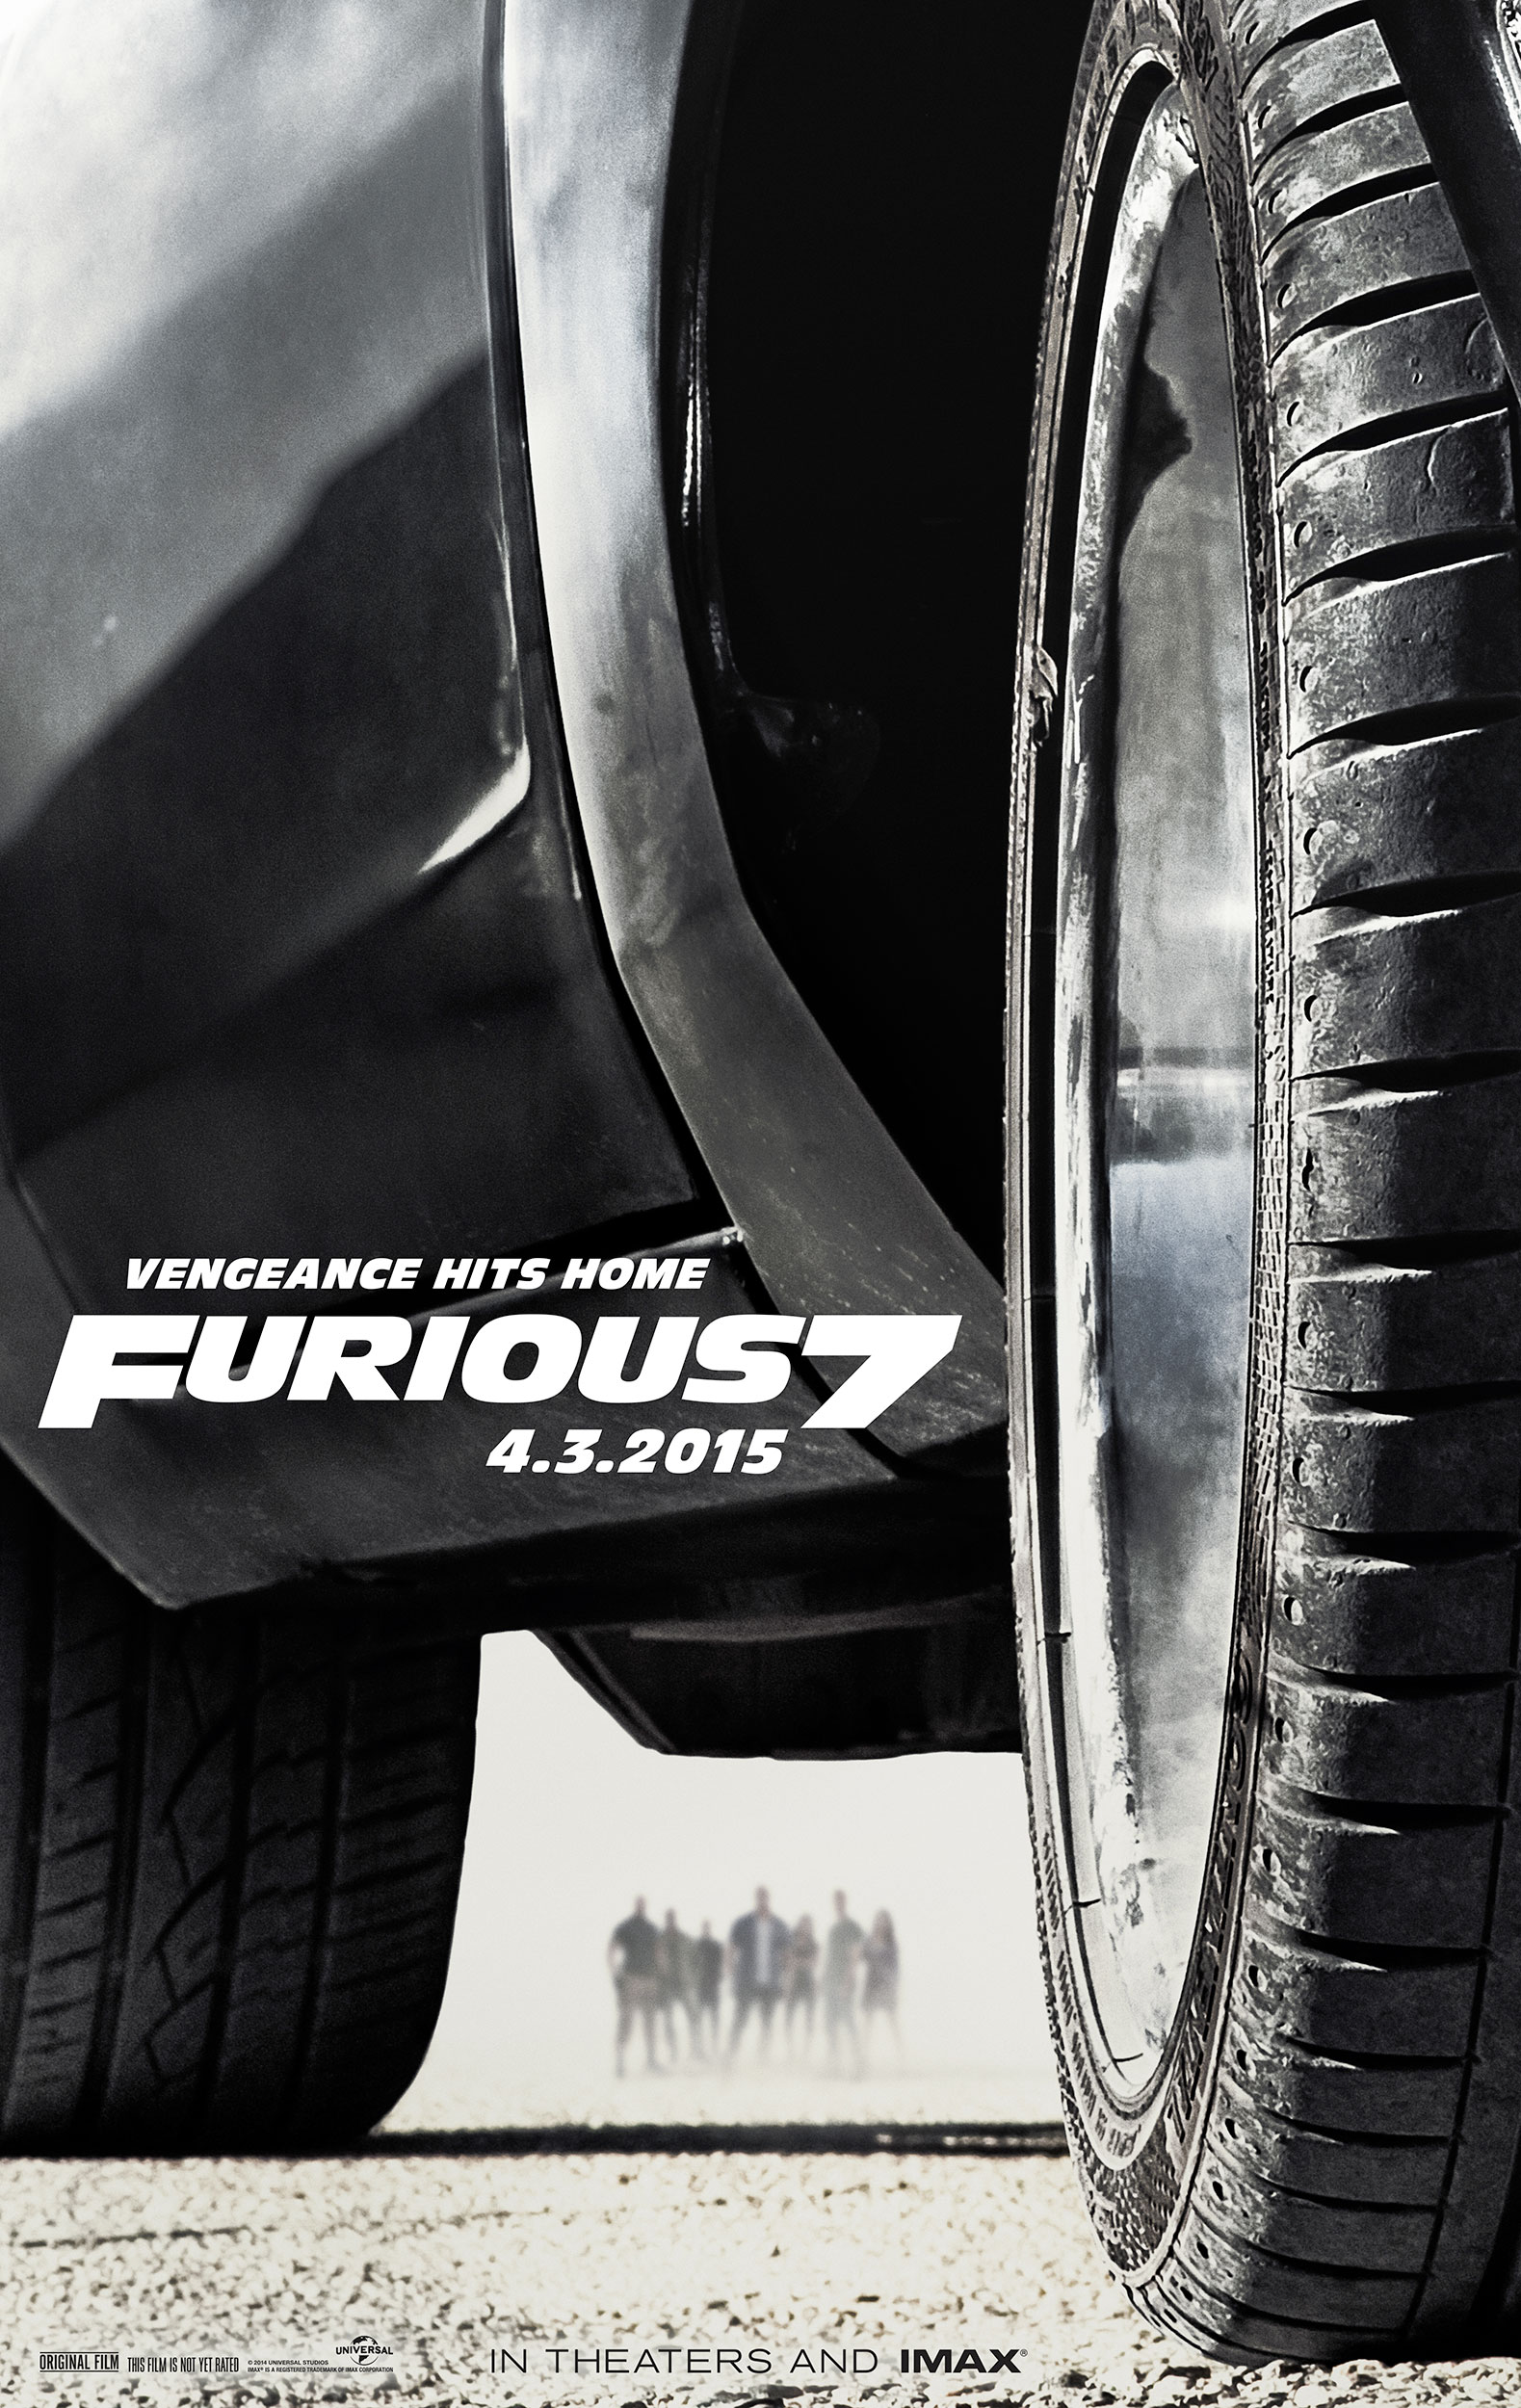 Fast and Furious 7 2015 1080p HDRip x264 AC3 JYK Obfuscated